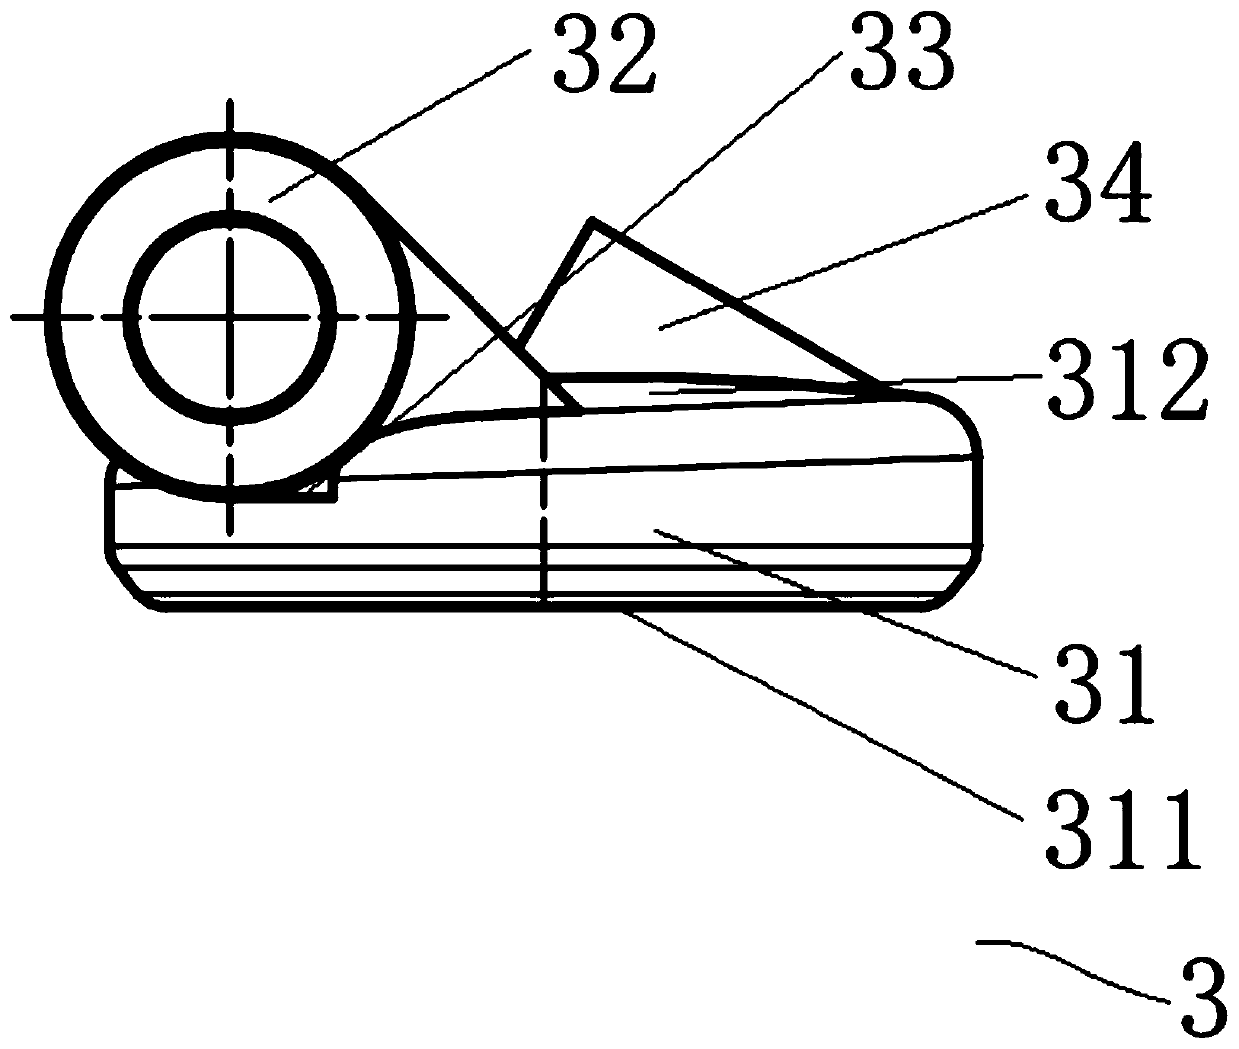 Inclined flap check valve